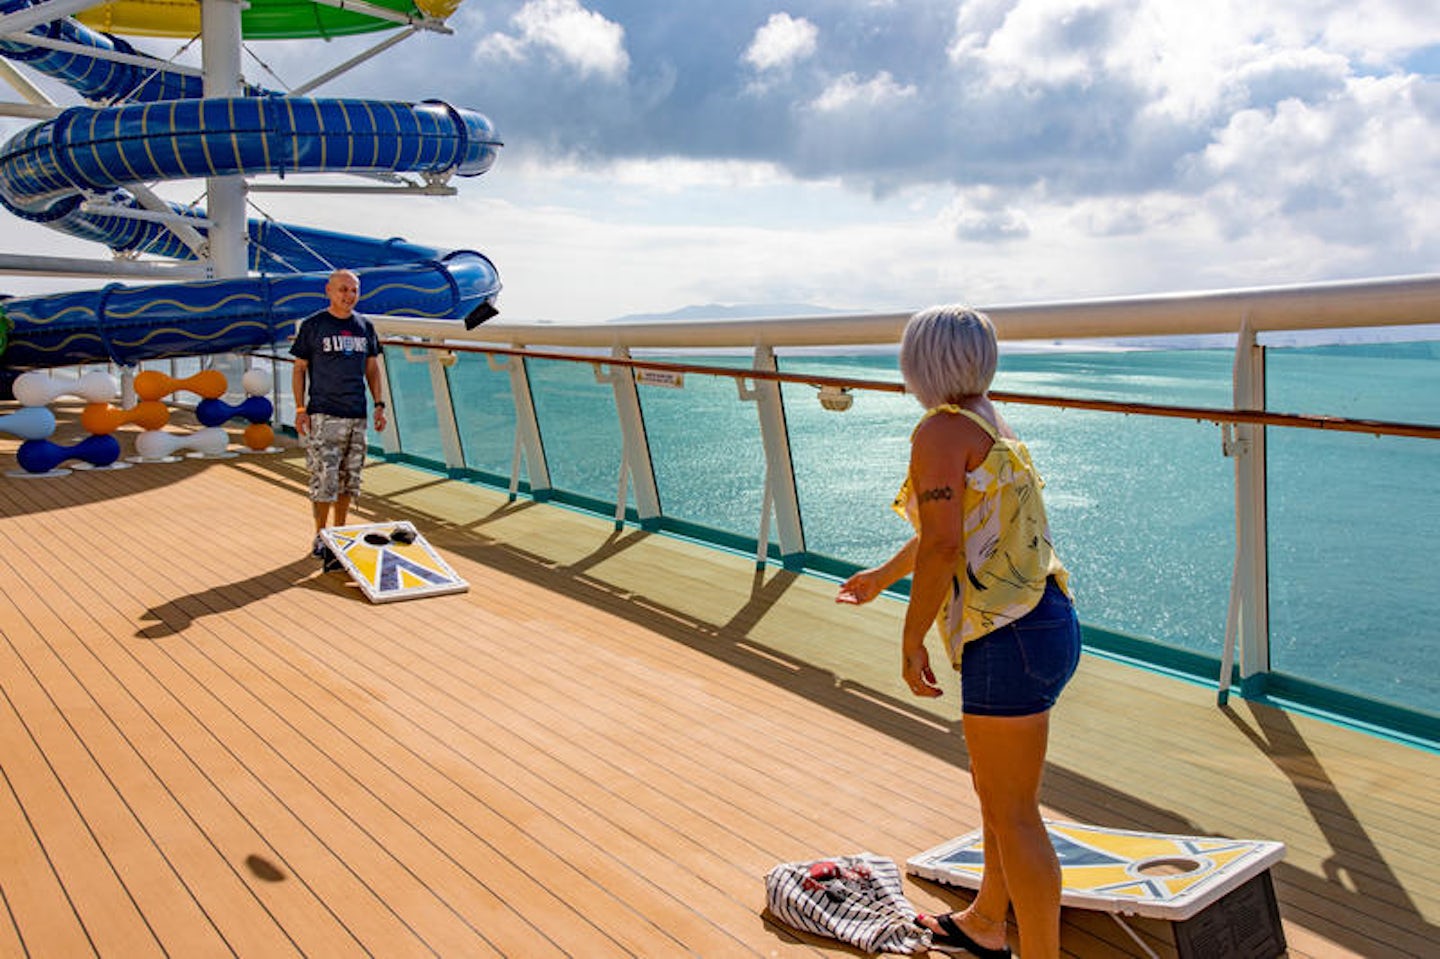 Deck Games on Independence of the Seas